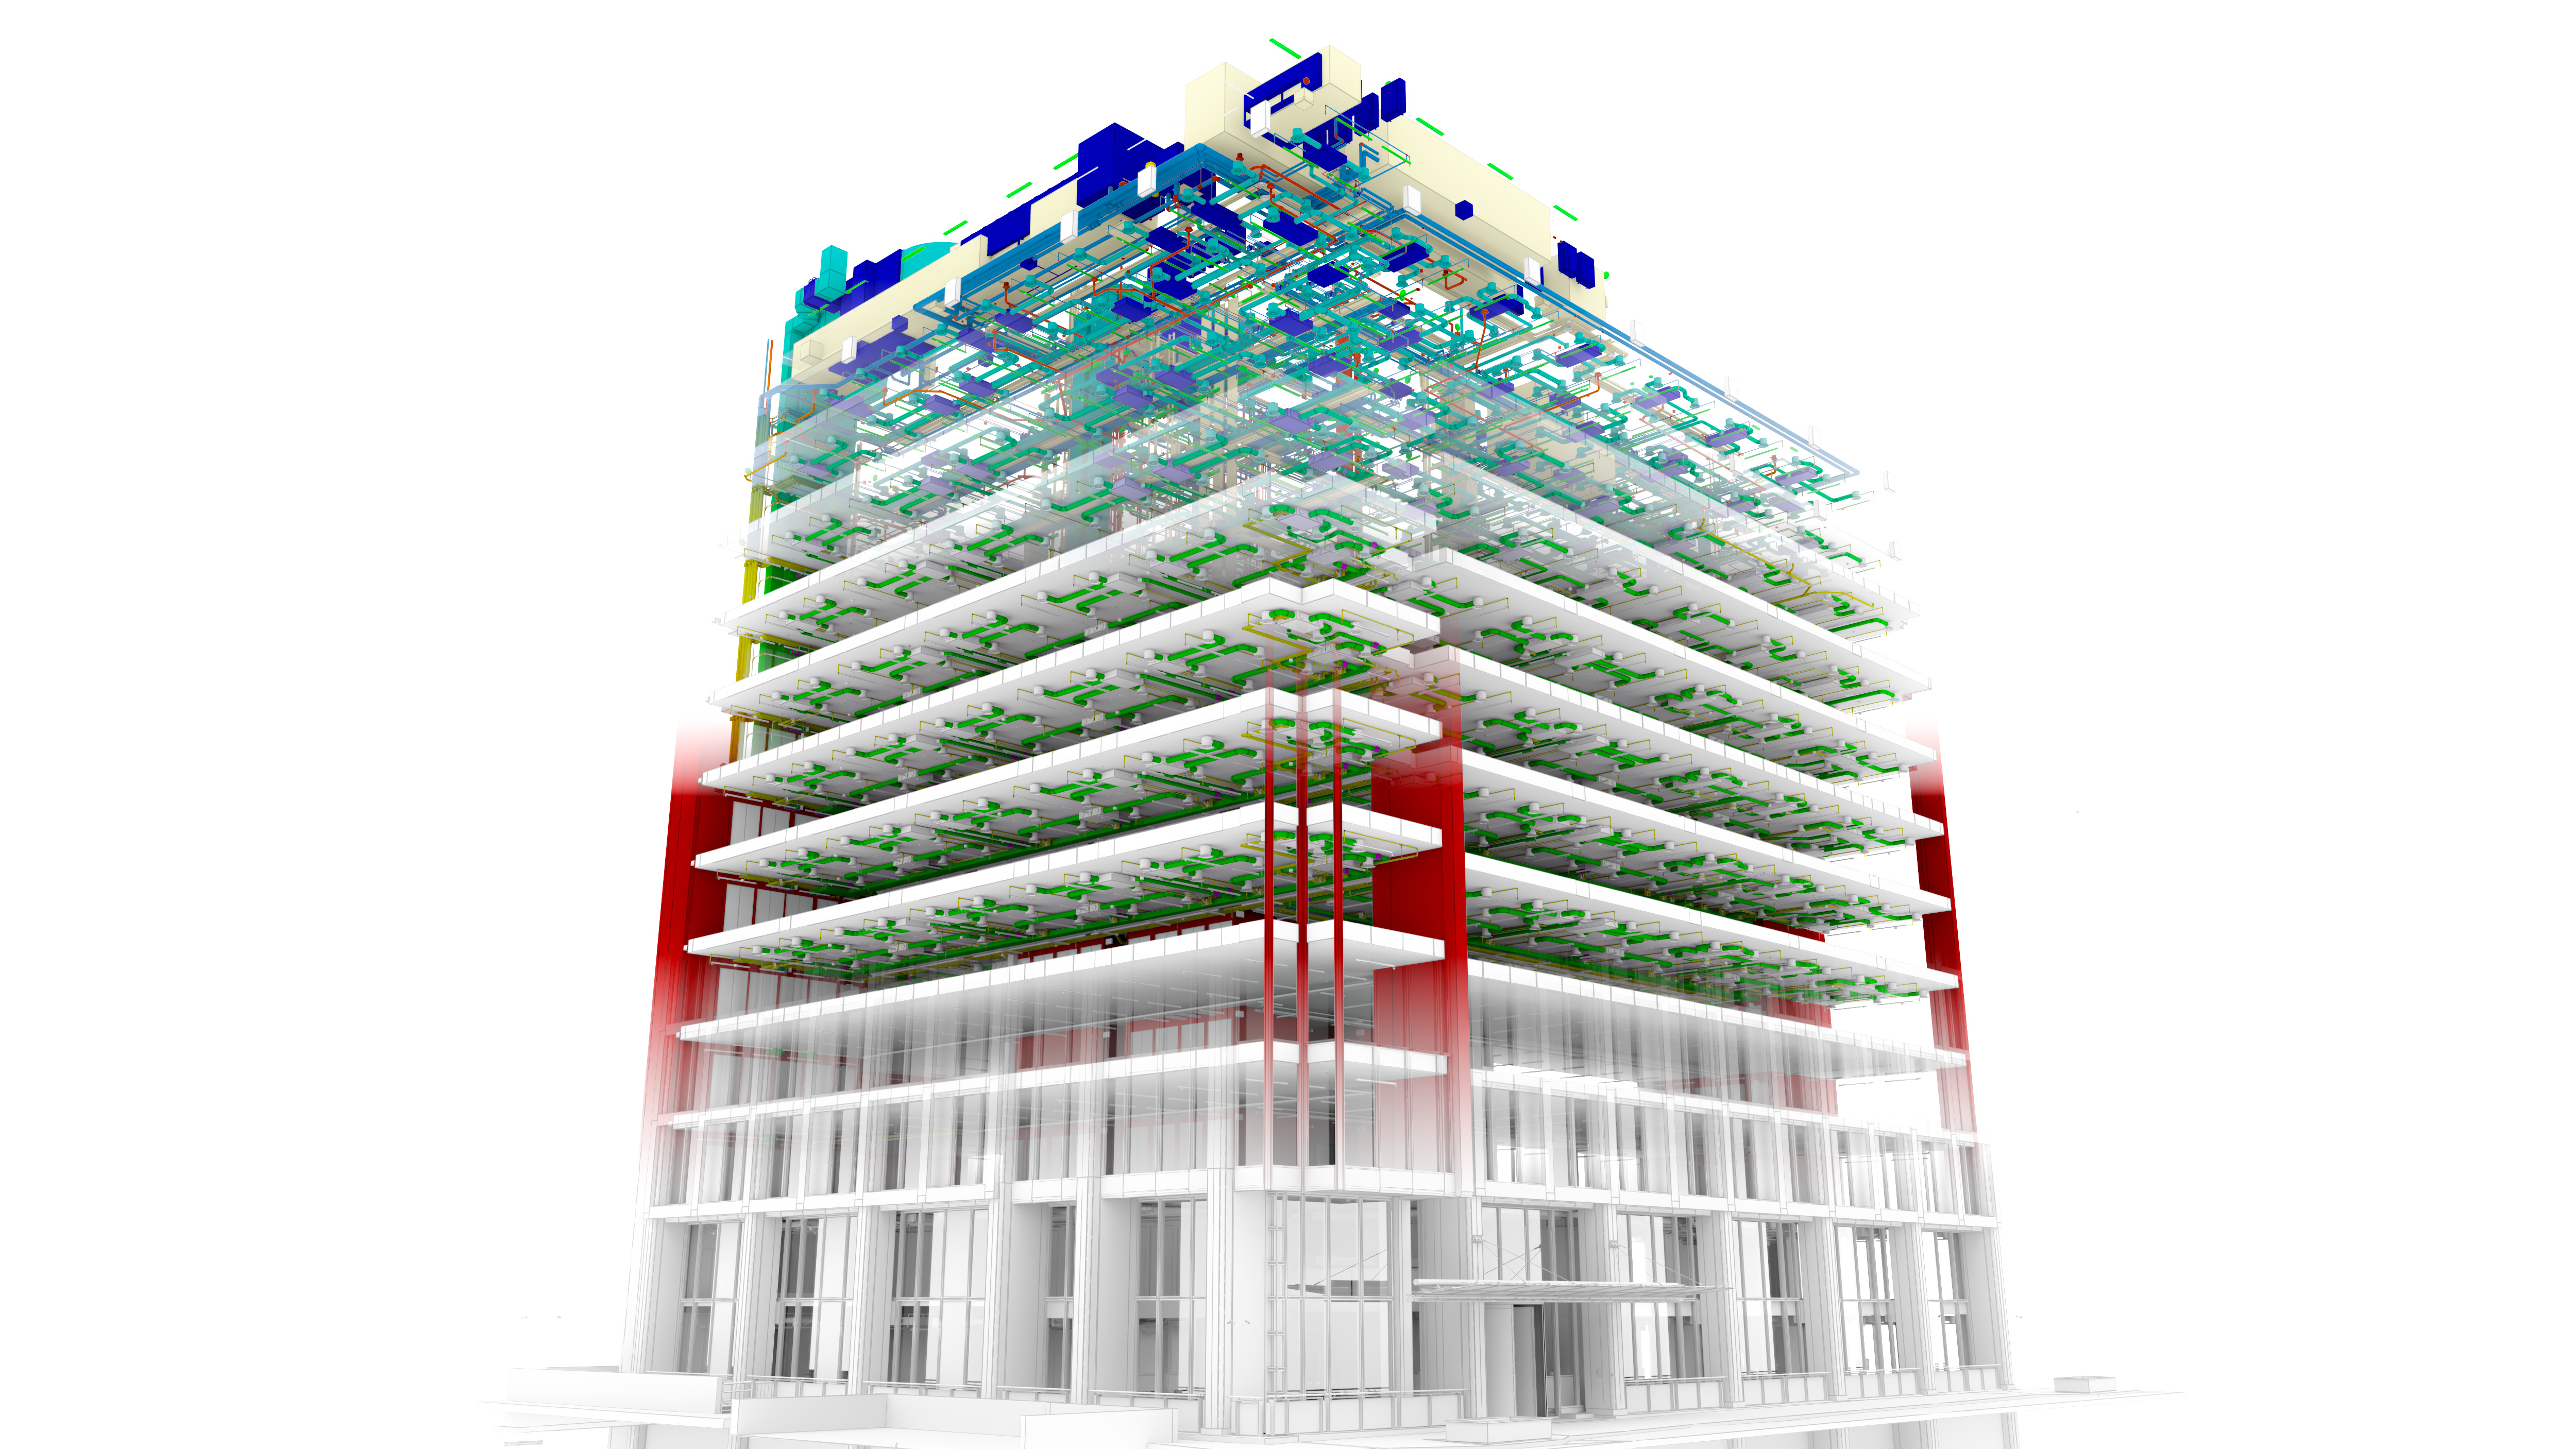 3D rendering of building with floors visible